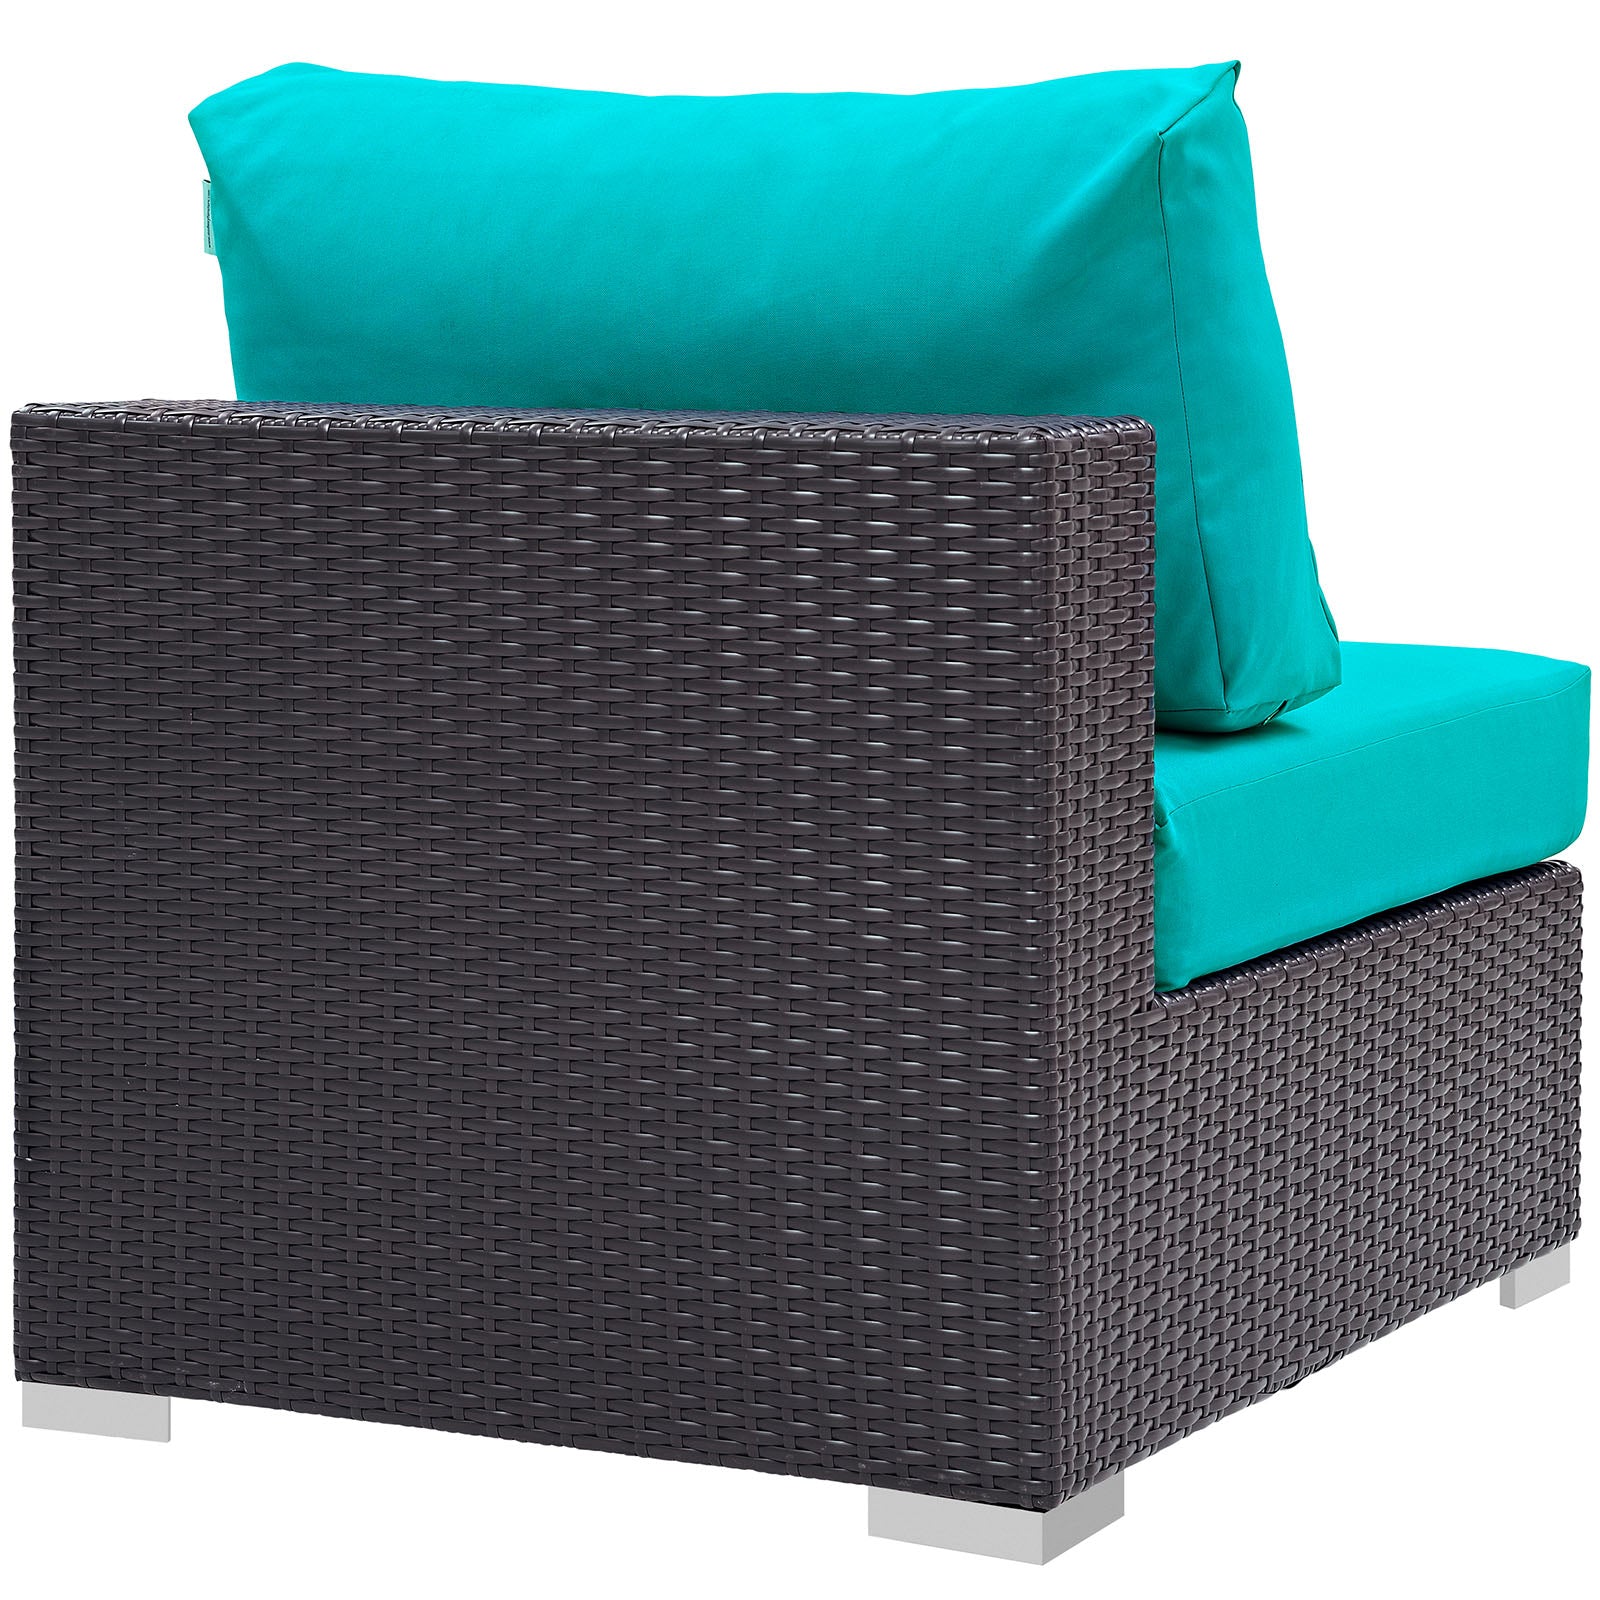 Modway Outdoor Chairs - Convene Outdoor Patio Armless Chair Espresso & Turquoise